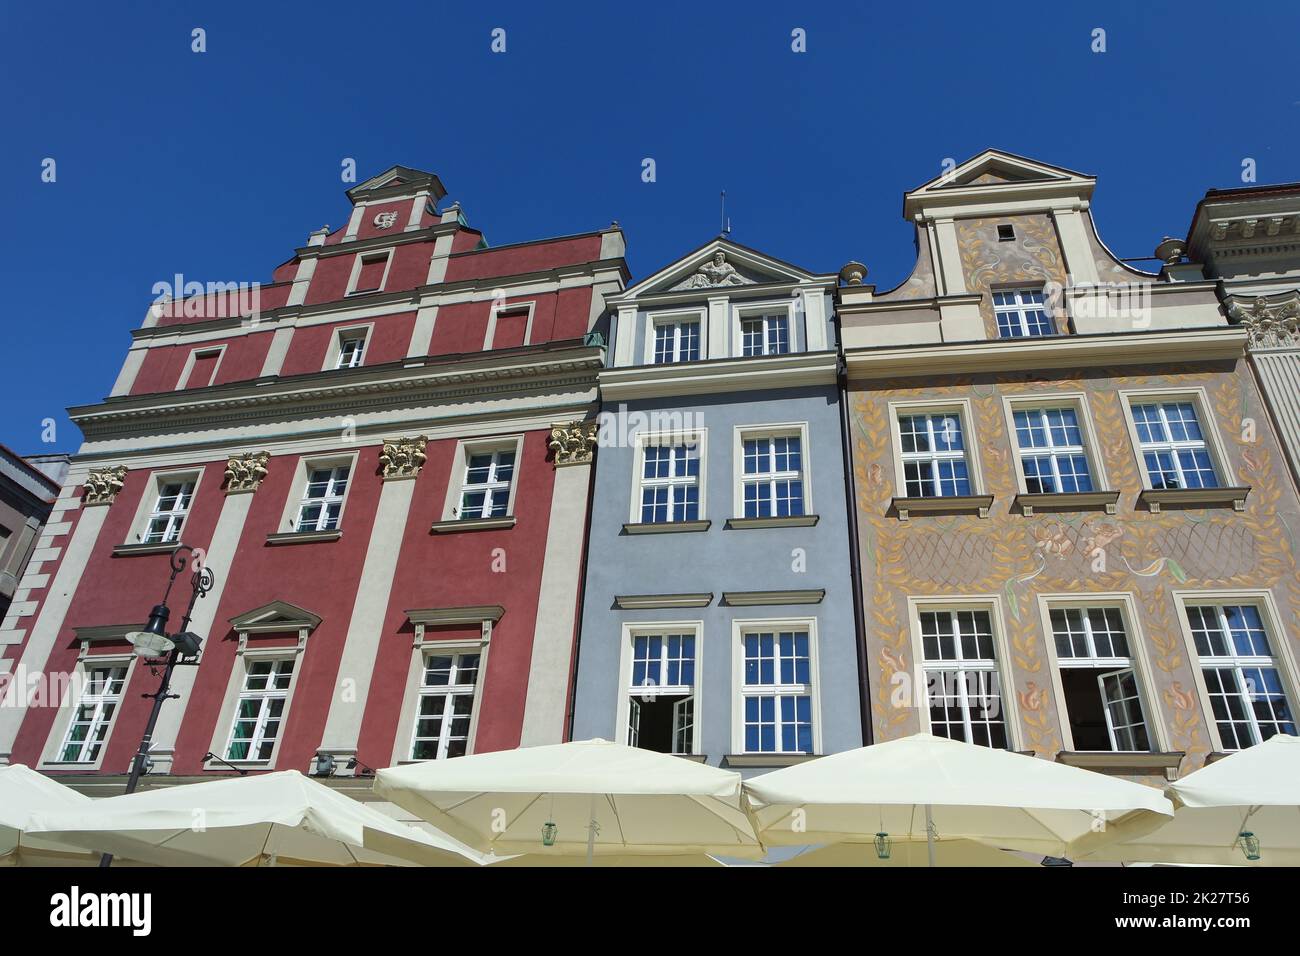 Historical facades on the market square in Poznan, Poland Stock Photo